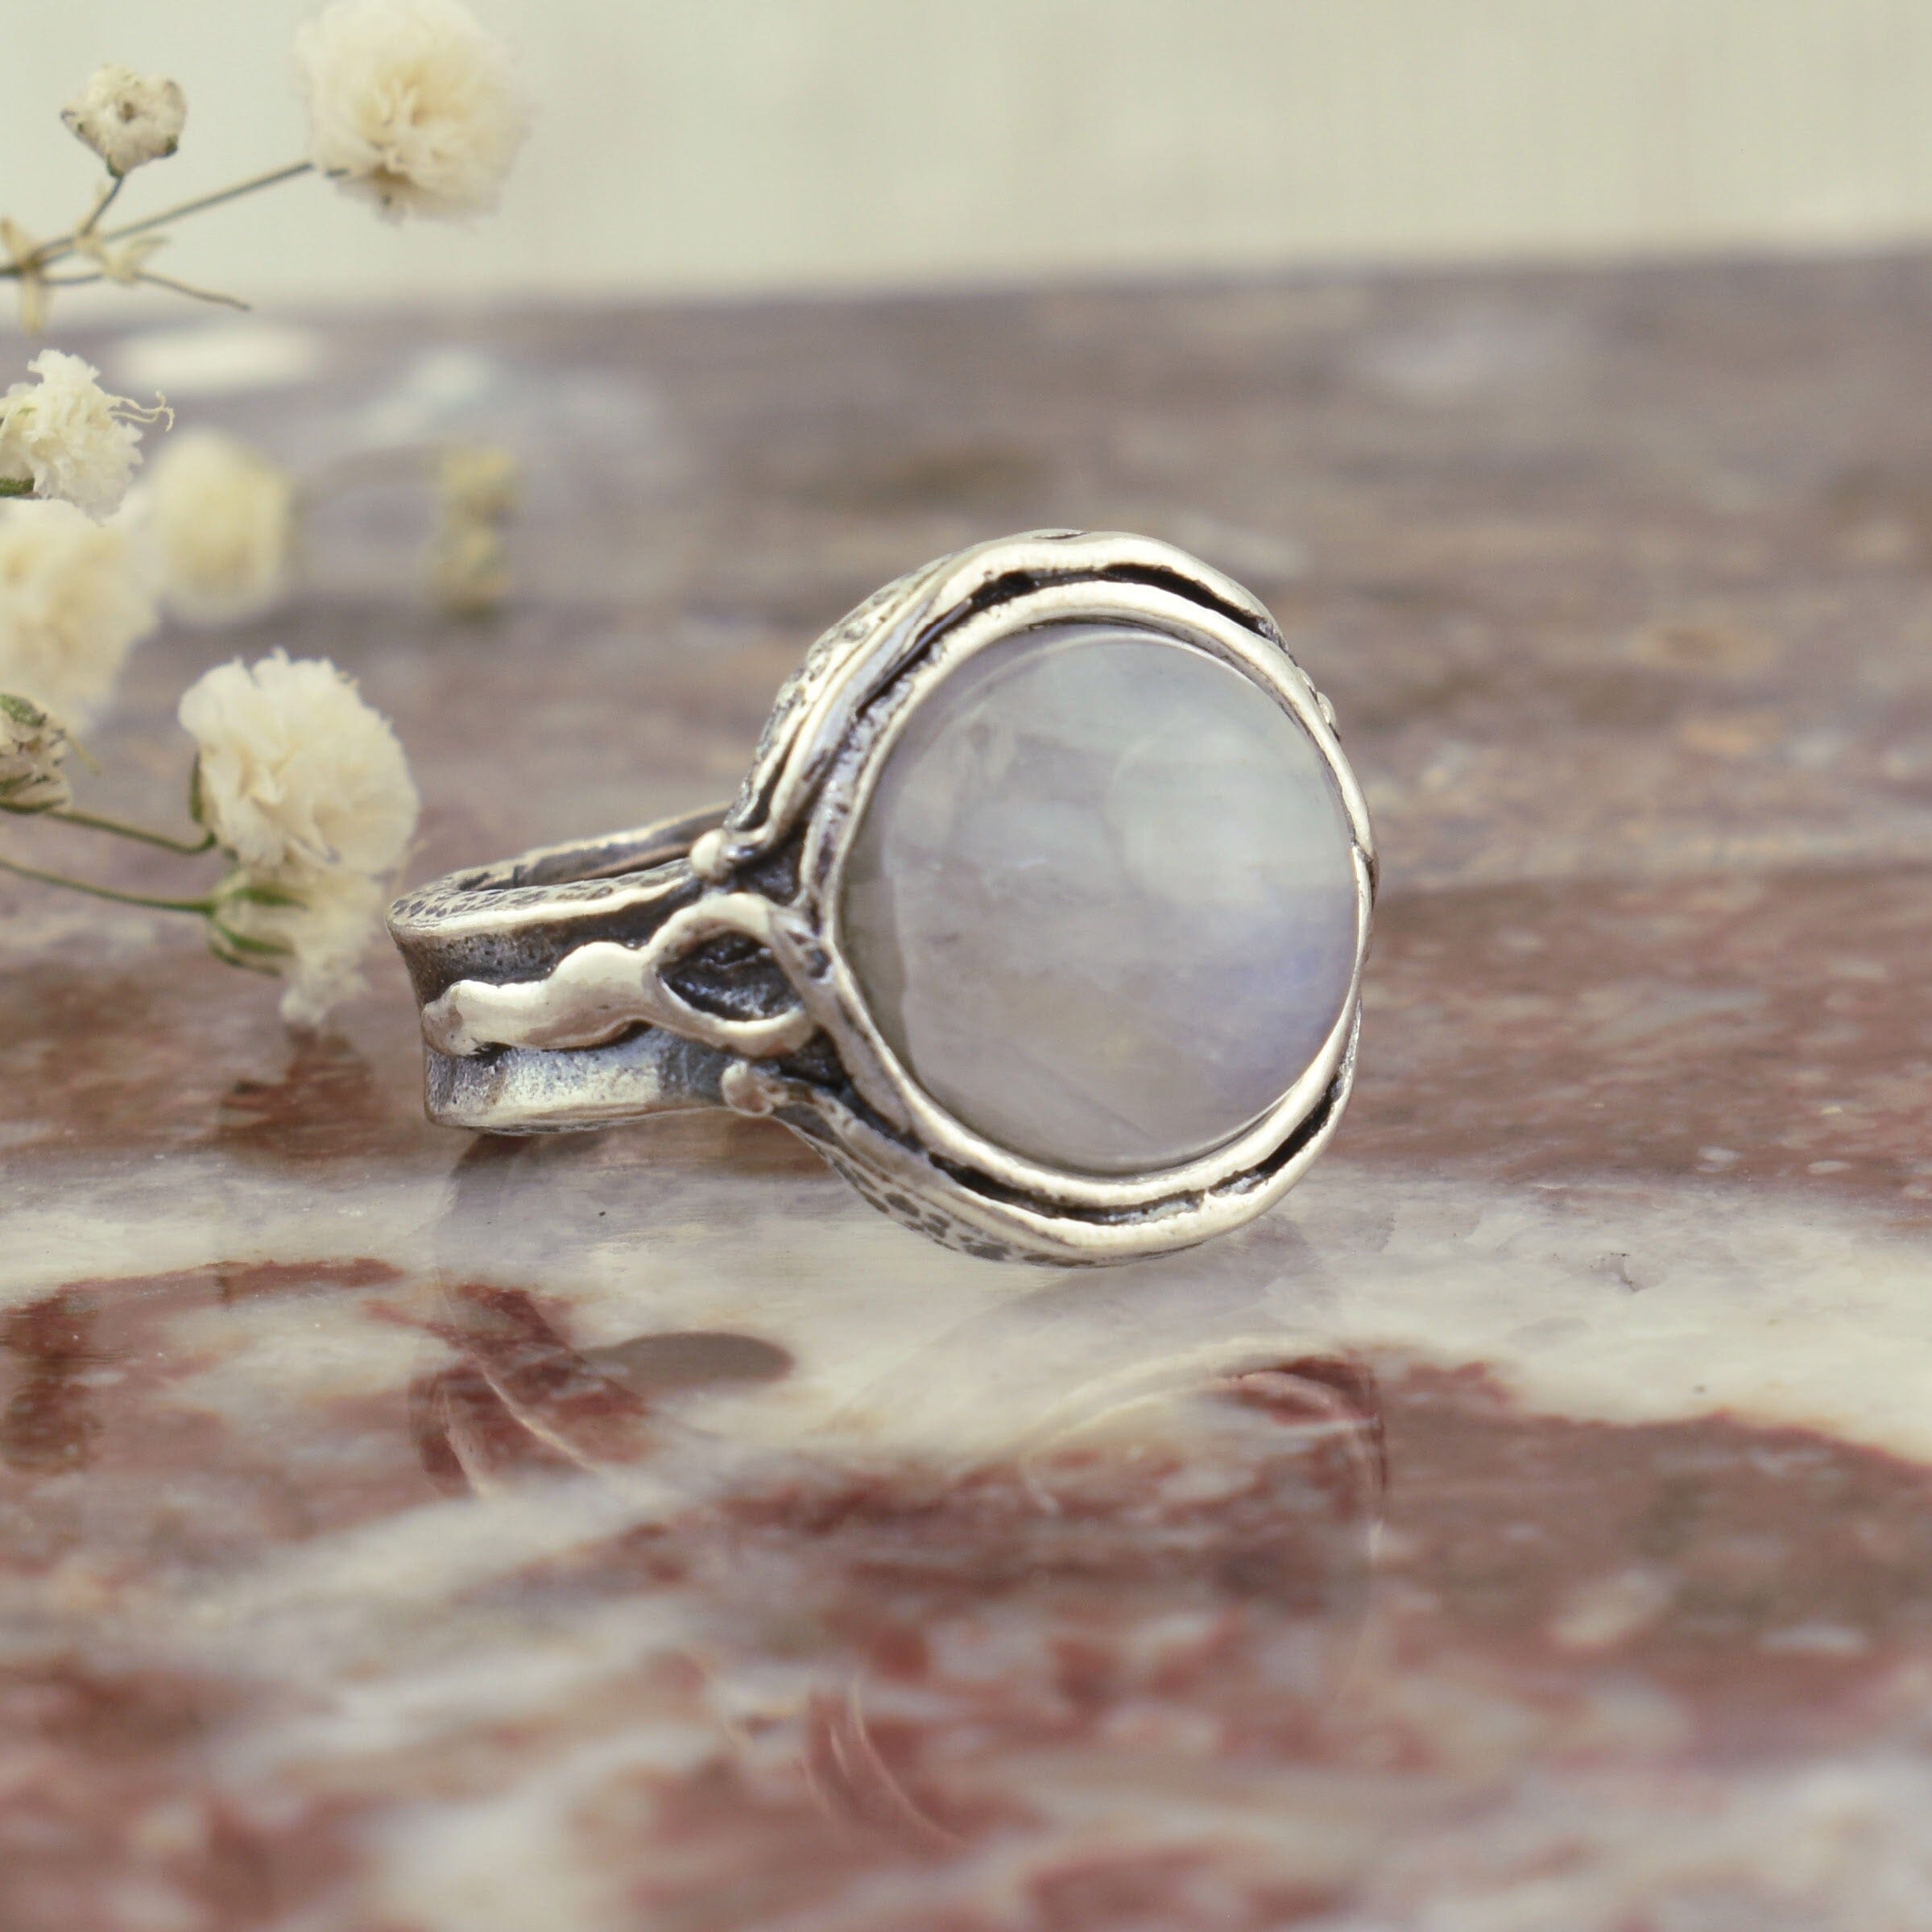 .925 sterling silver ring with round moonstone